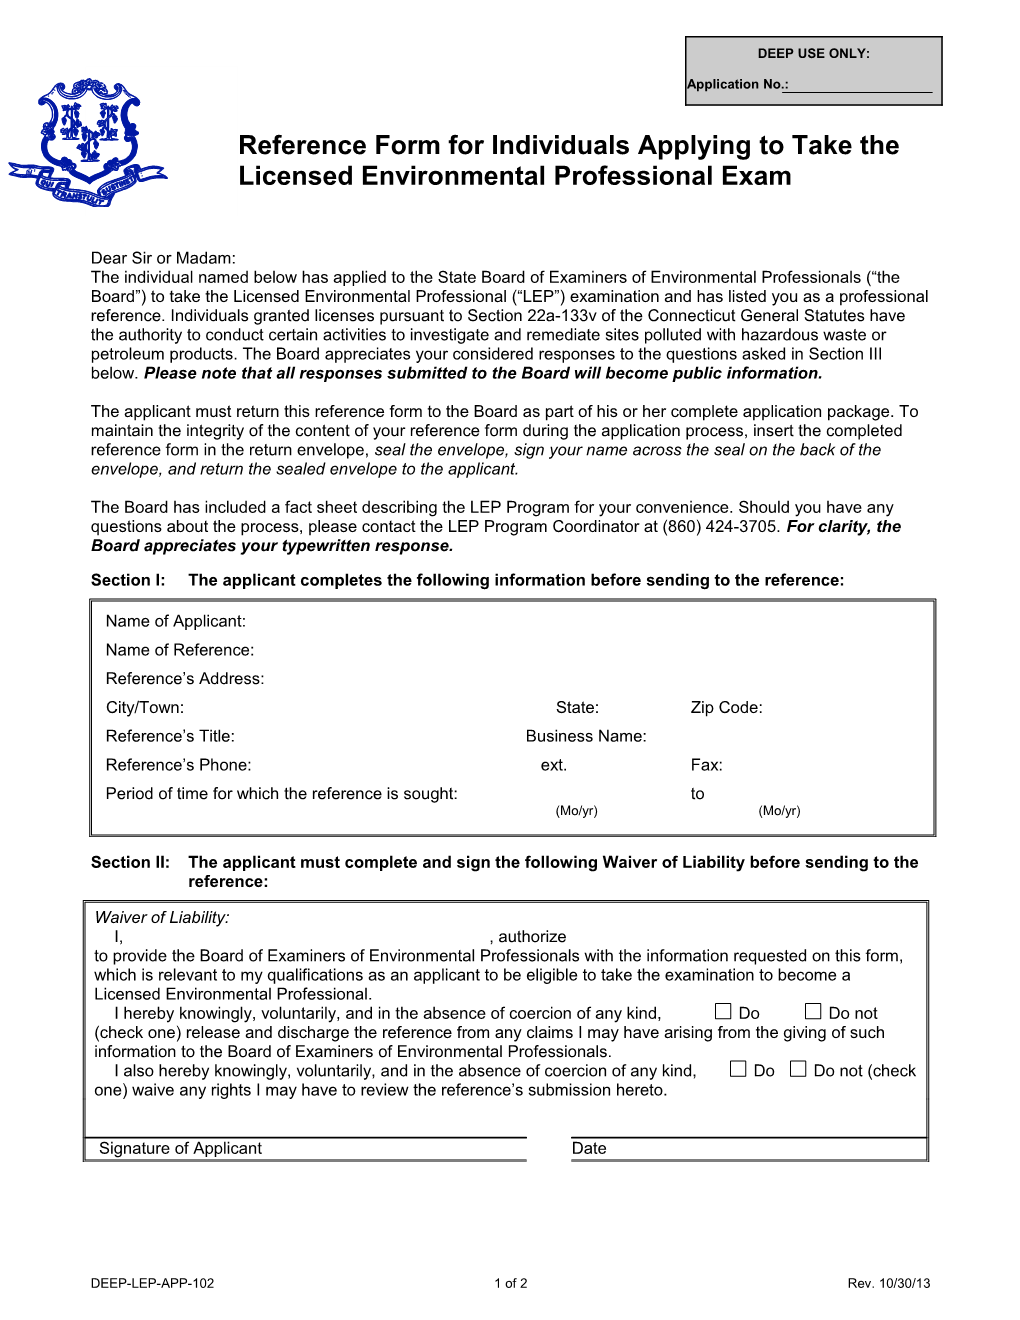 Reference Form for Individuals Applying to Take the Licensed Environmental Professional Exam